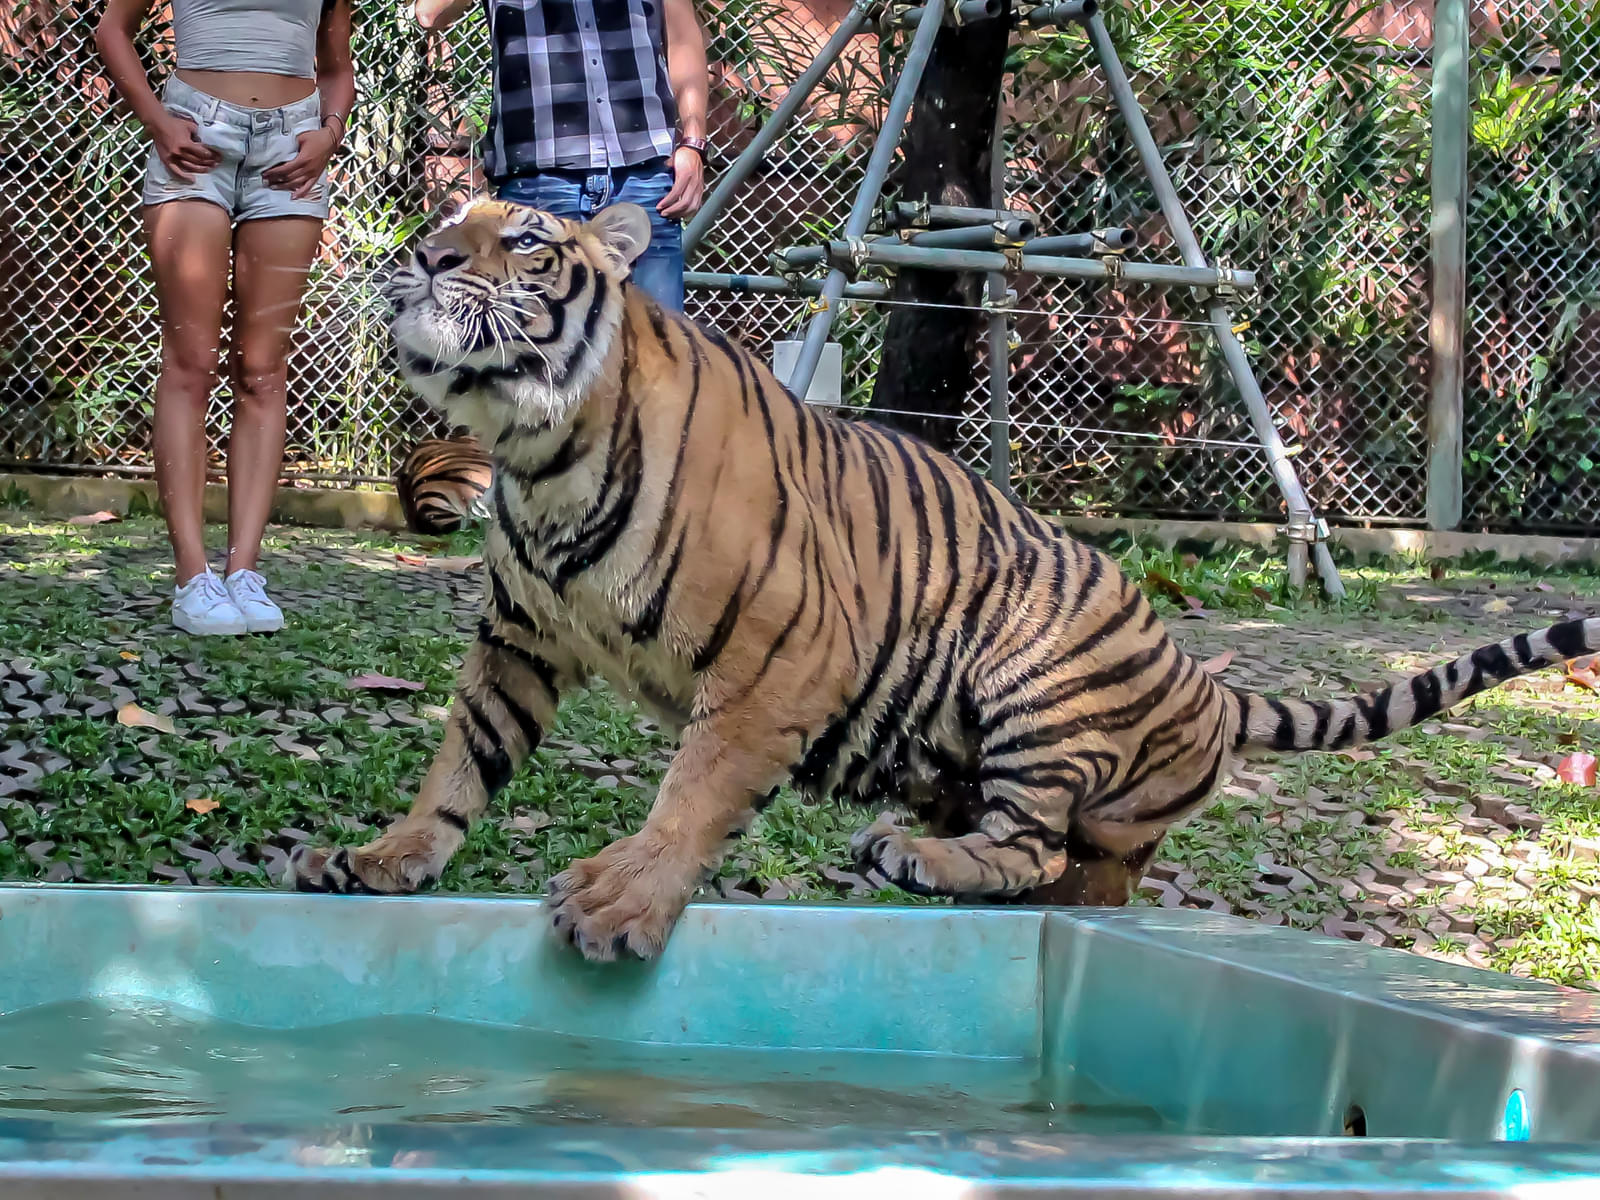 Learn more about the behaviors of the tigers